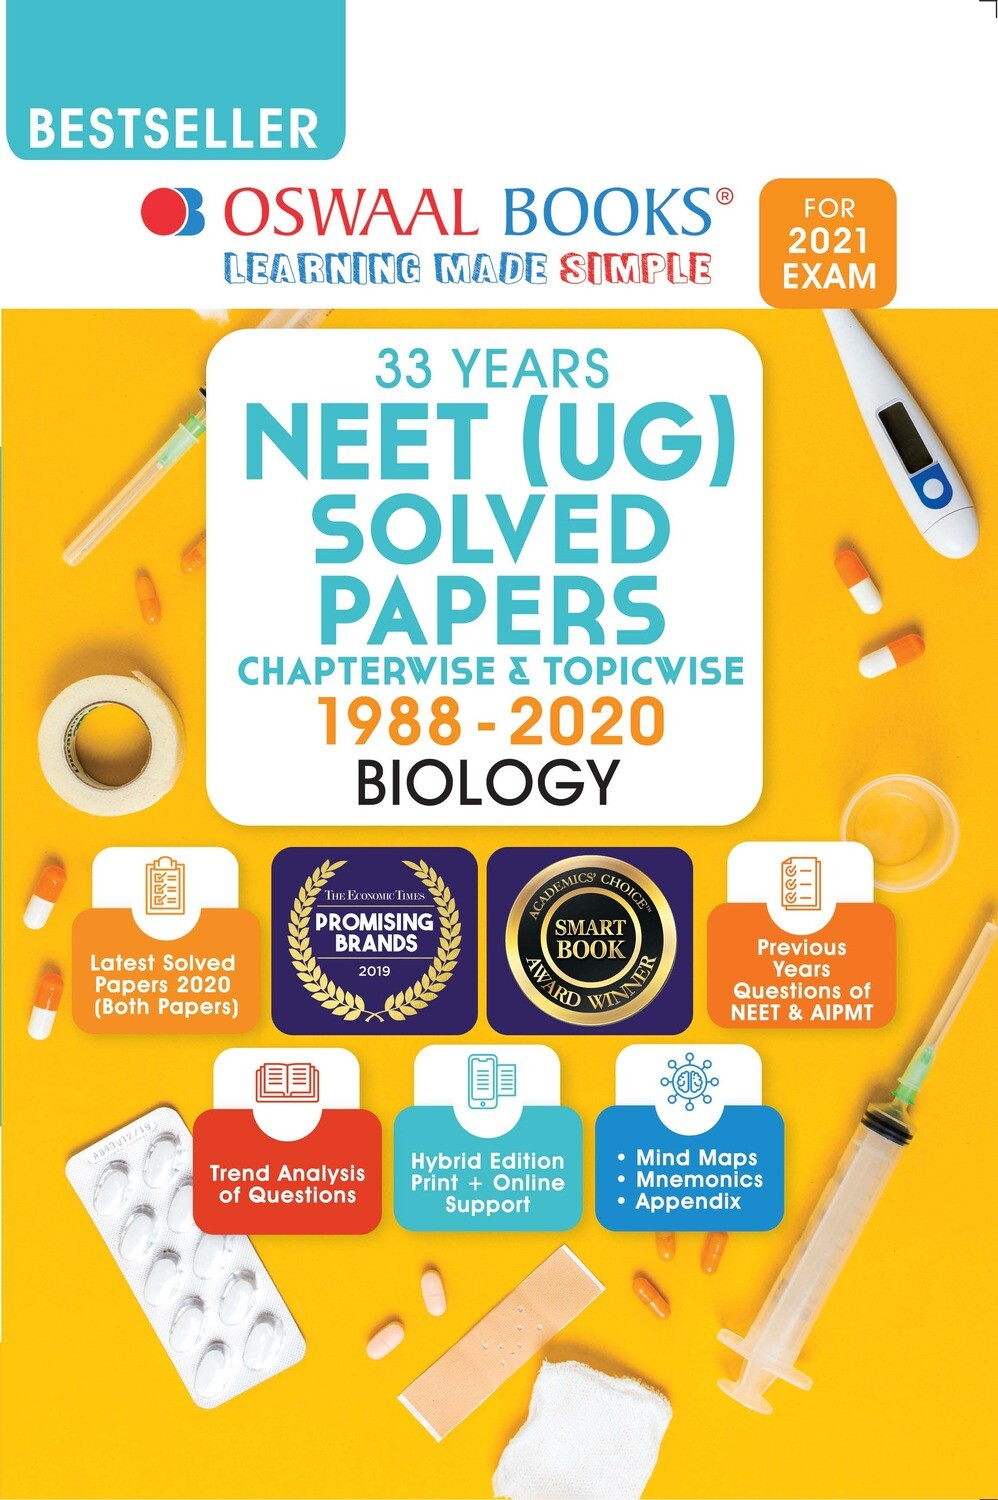 Buy e-book: Oswaal NEET (UG) Solved Papers Chapterwise & Topicwise Biology Book (For 2021 Exam)